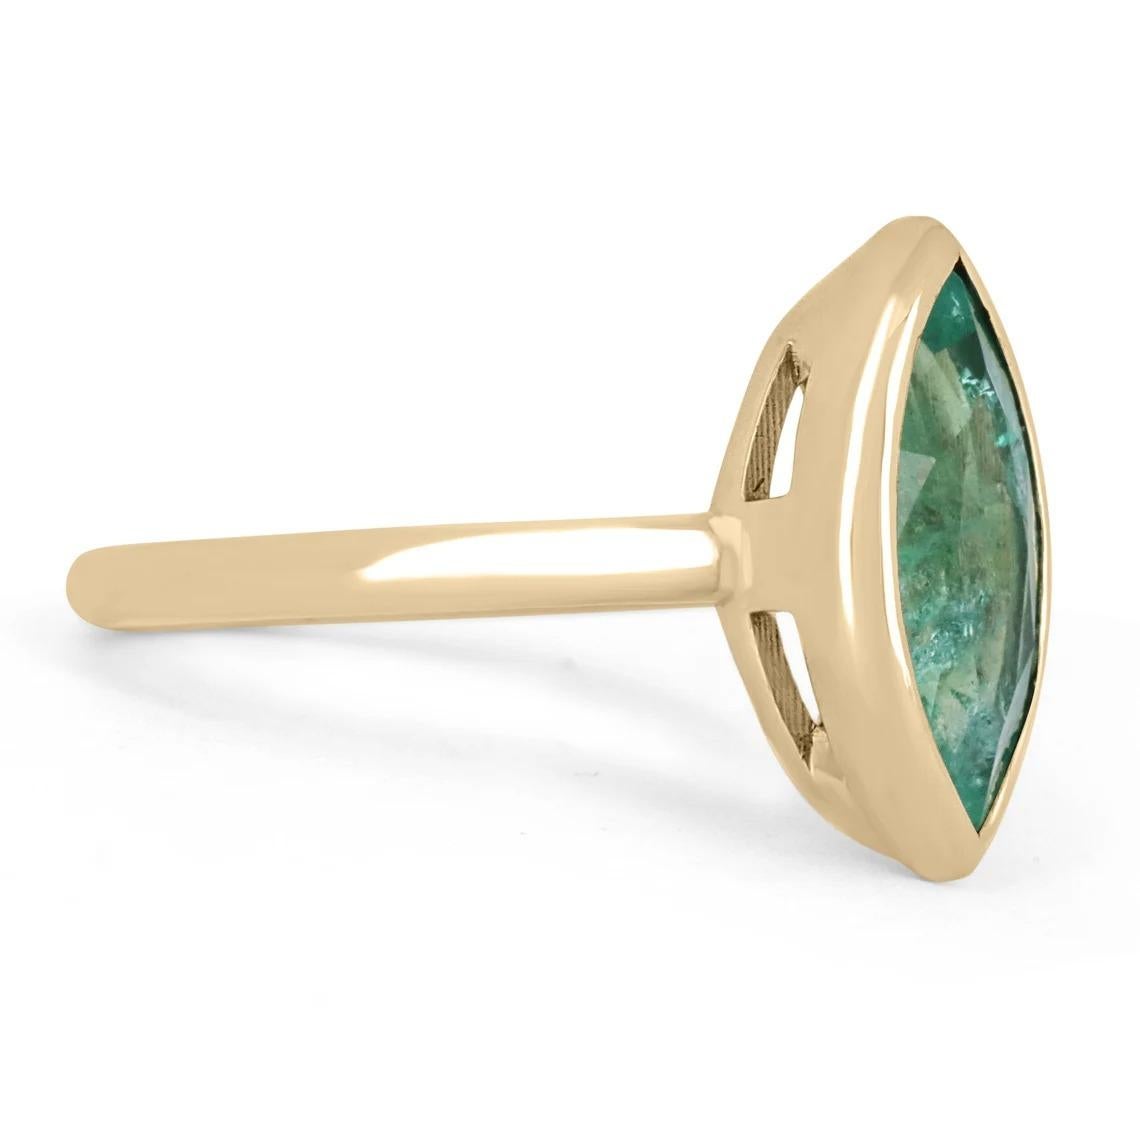 Displayed is a stunning natural emerald, marquise cut gold ring. This custom piece is extremely unique, as having emeralds cut in these rare shapes is very uncommon. This natural emerald marquise showcases gorgeous medium green color and good